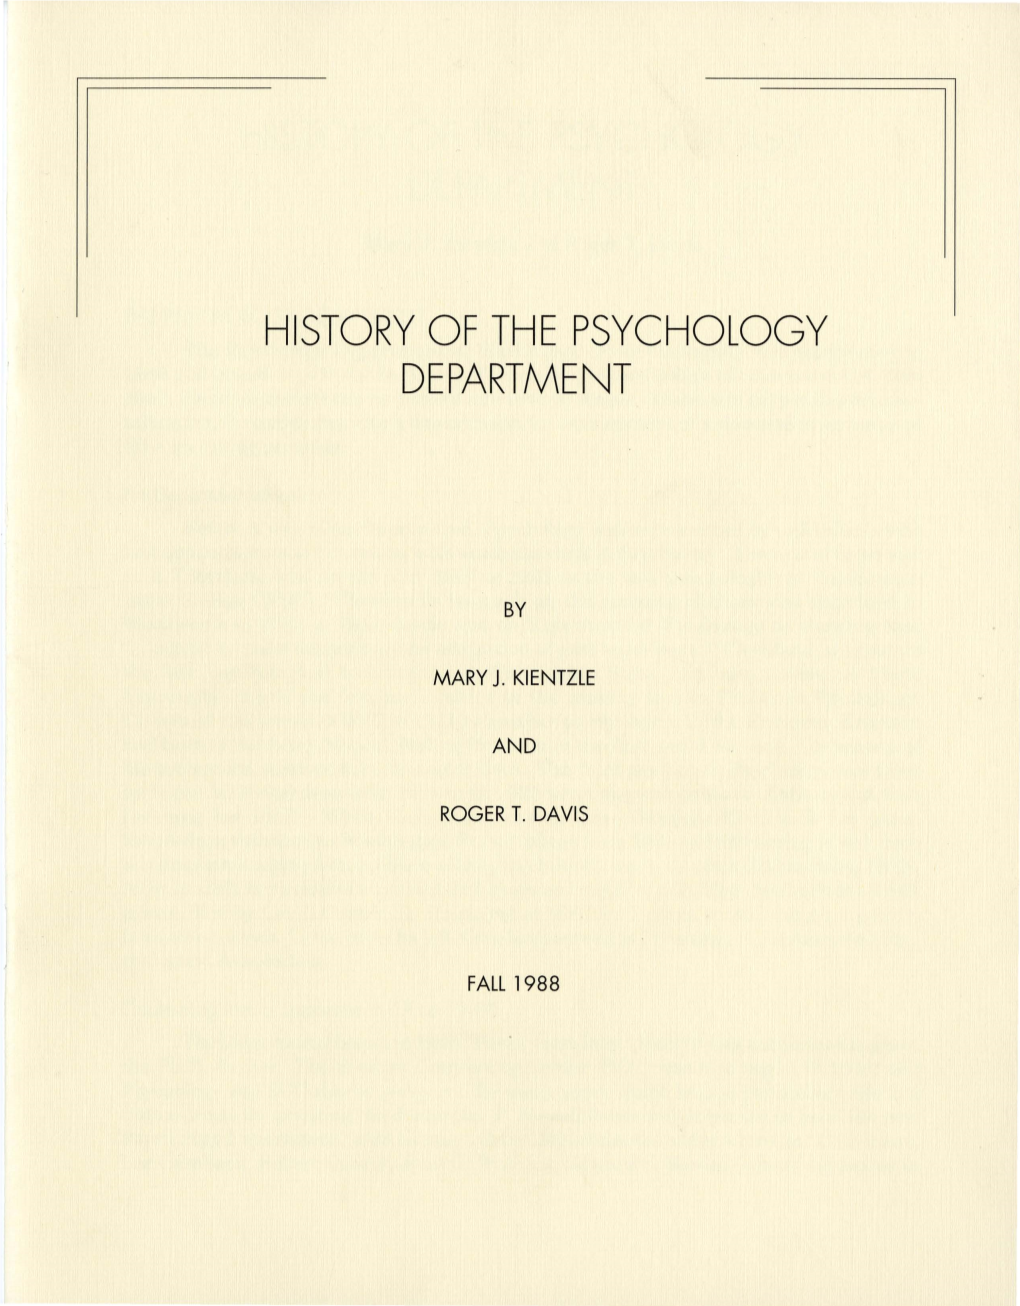 History of the Psychology Department